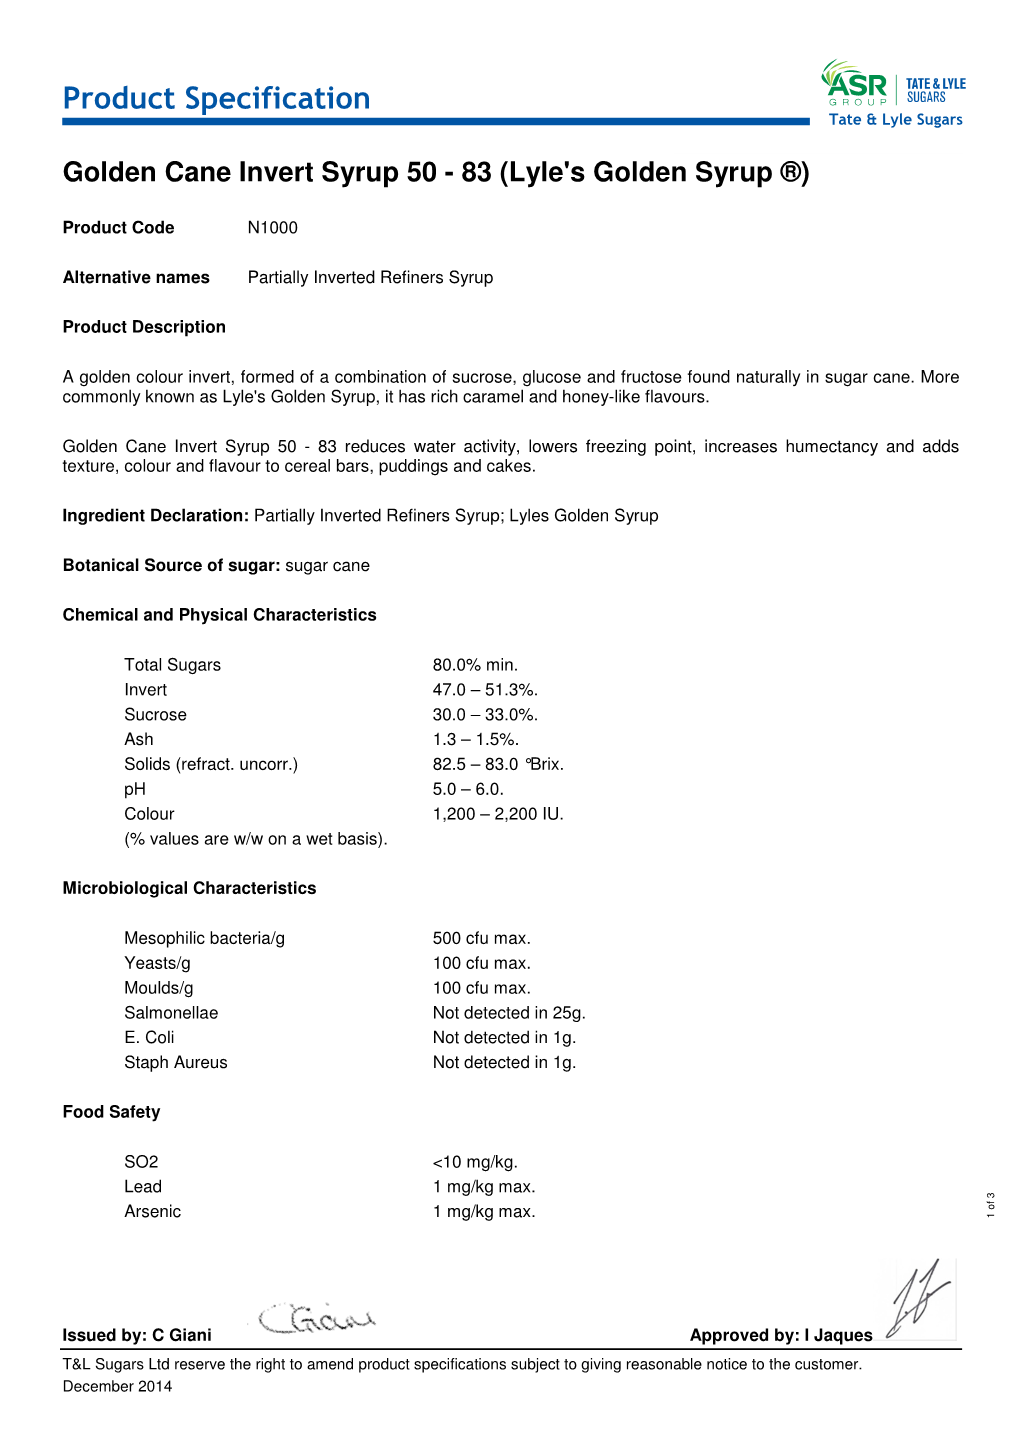 Product Specification Tate & Lyle Sugars